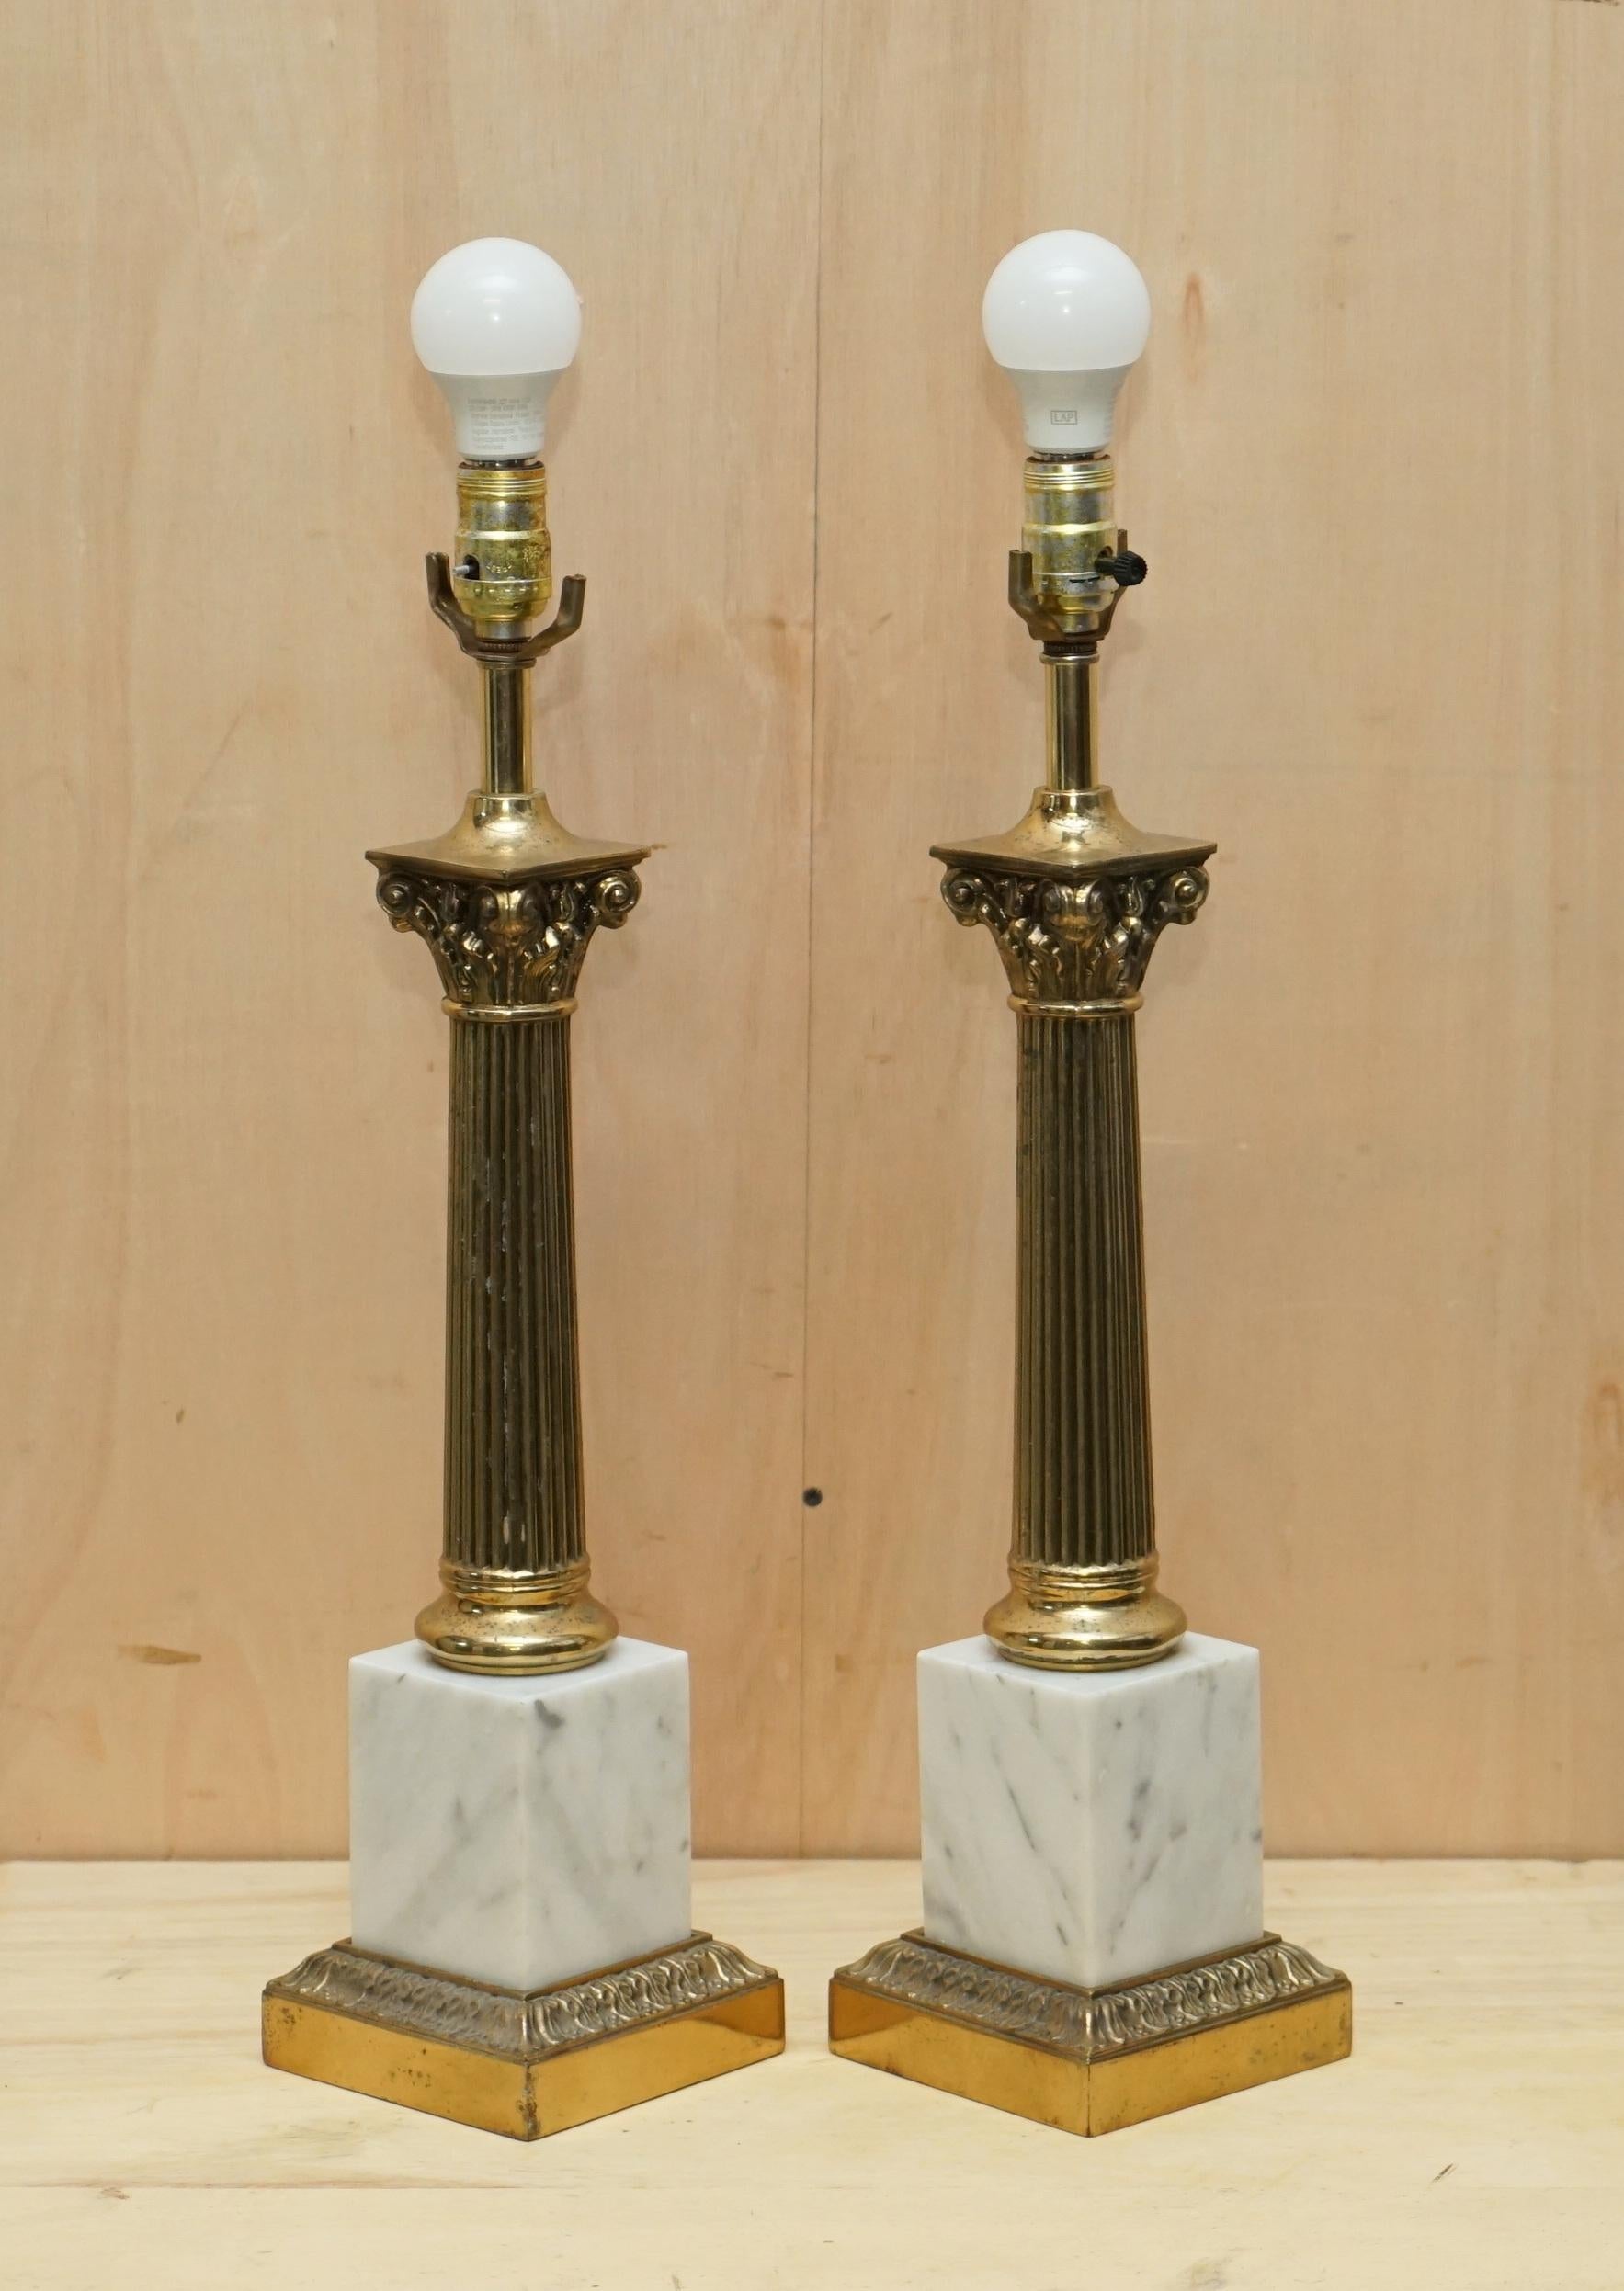 We are delighted to offer for sale this stunning pair of vintage Italian Carrara Marble & Brass Roman Corinthian Pillared table lamps.

These lamps came from a very fine antiques dealer in Belgium, he has a client that purchases antique Italian